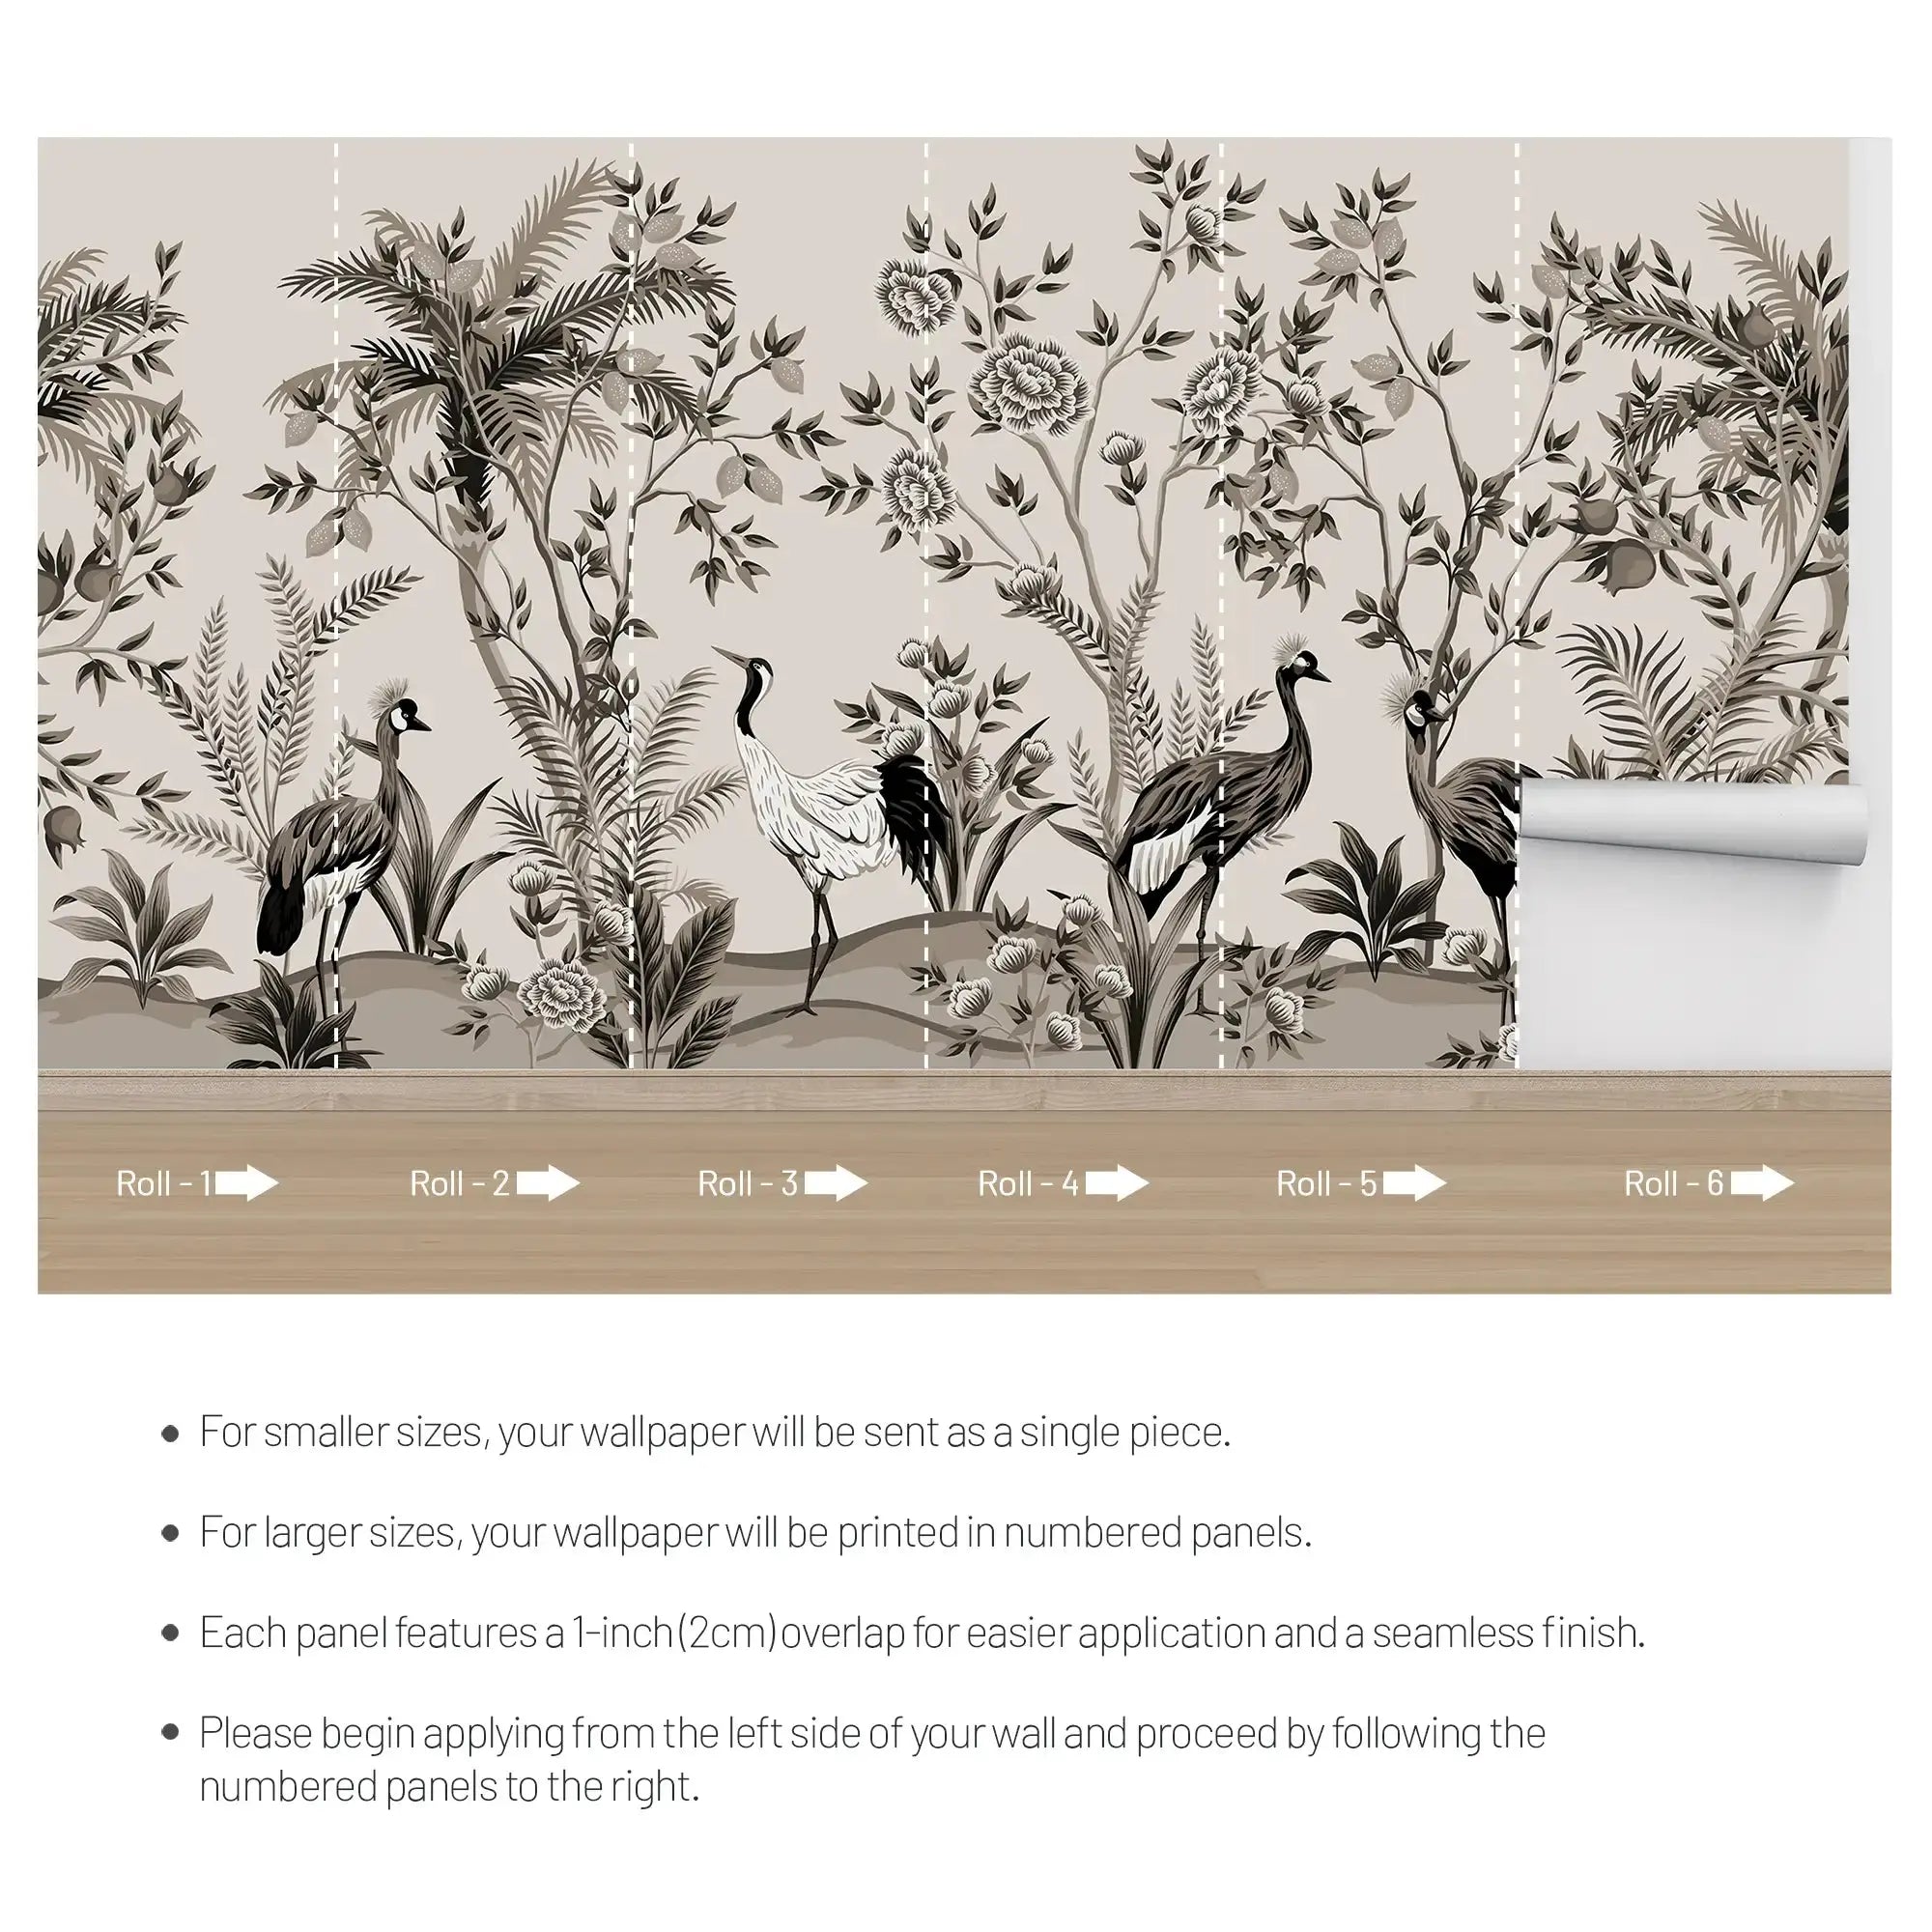 3107-F / Peelable Asian Wallpaper - Oriental Style with Cranes and Flowers - Easy Install Wall Mural - Artevella